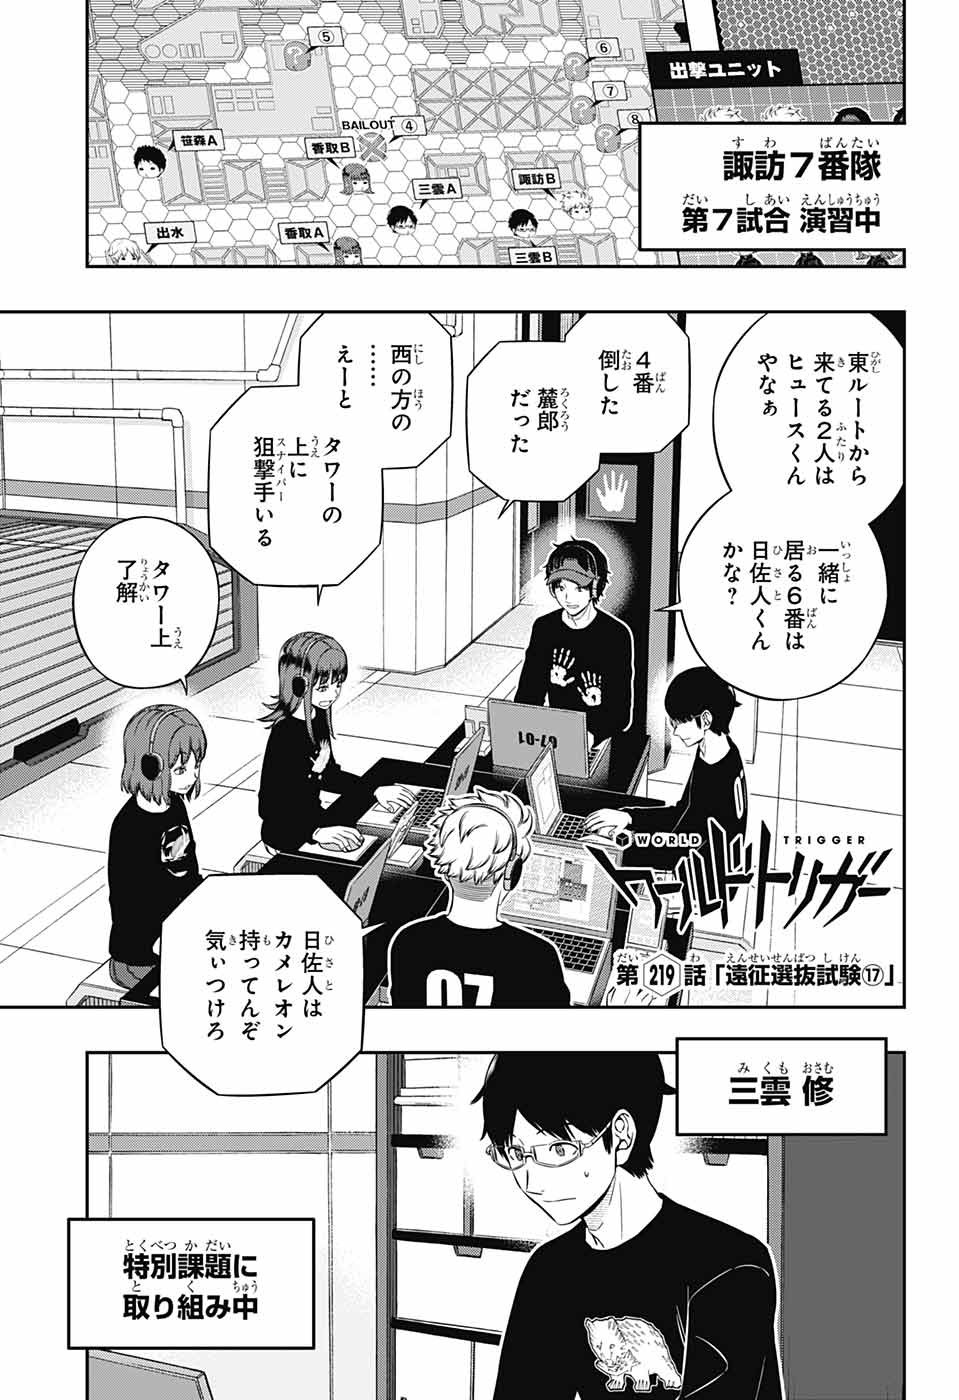 World Trigger - Chapter 219 - Page 1